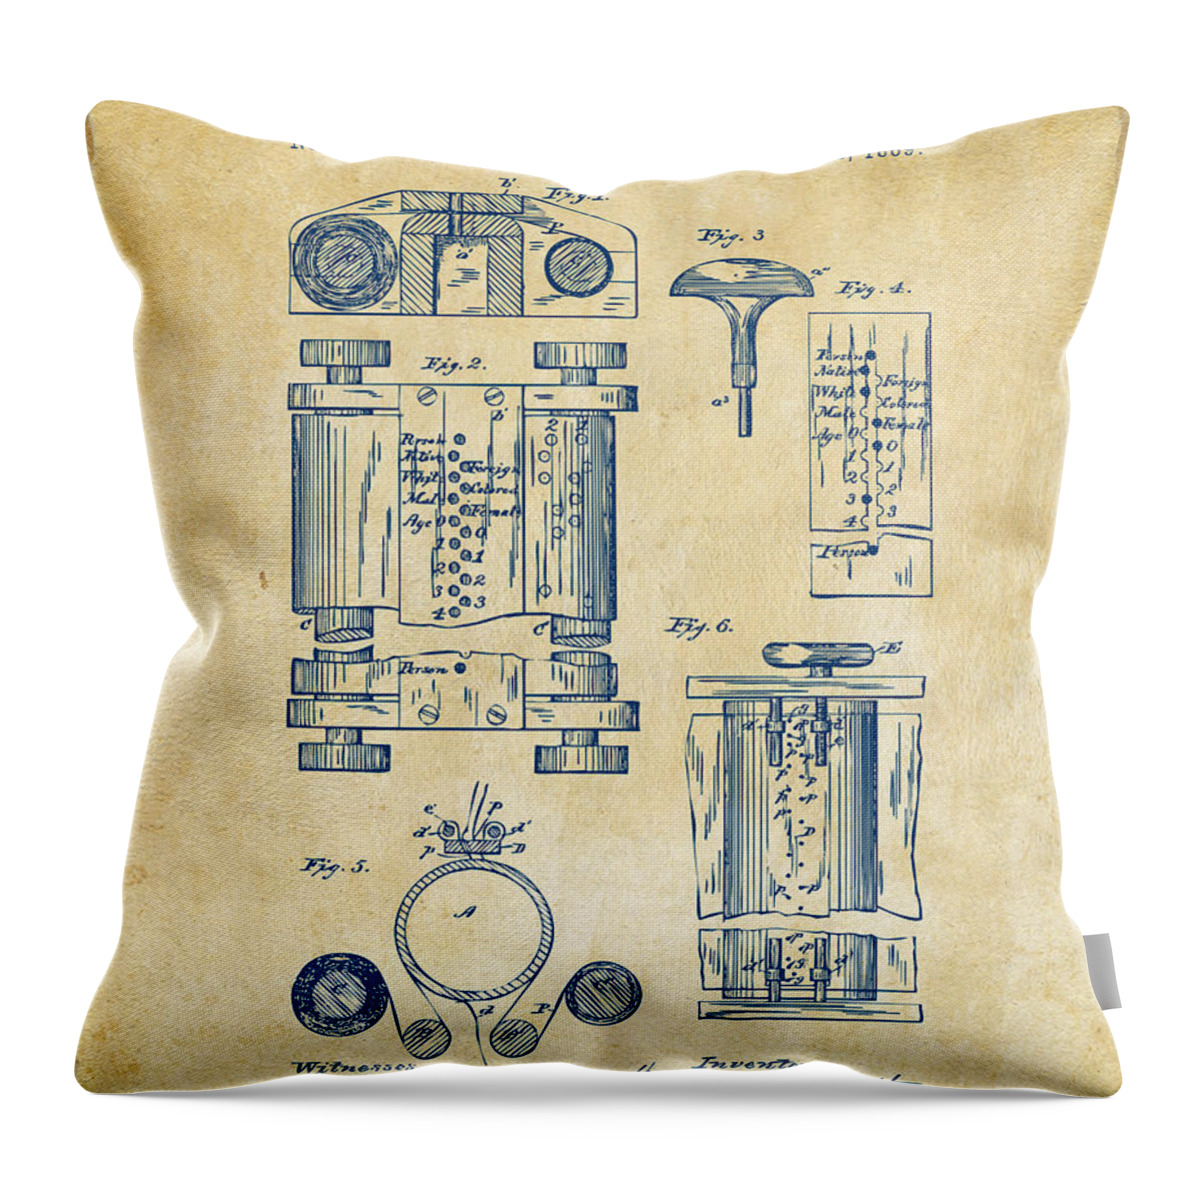 First Computer Throw Pillow featuring the digital art 1889 First Computer Patent Vintage by Nikki Marie Smith